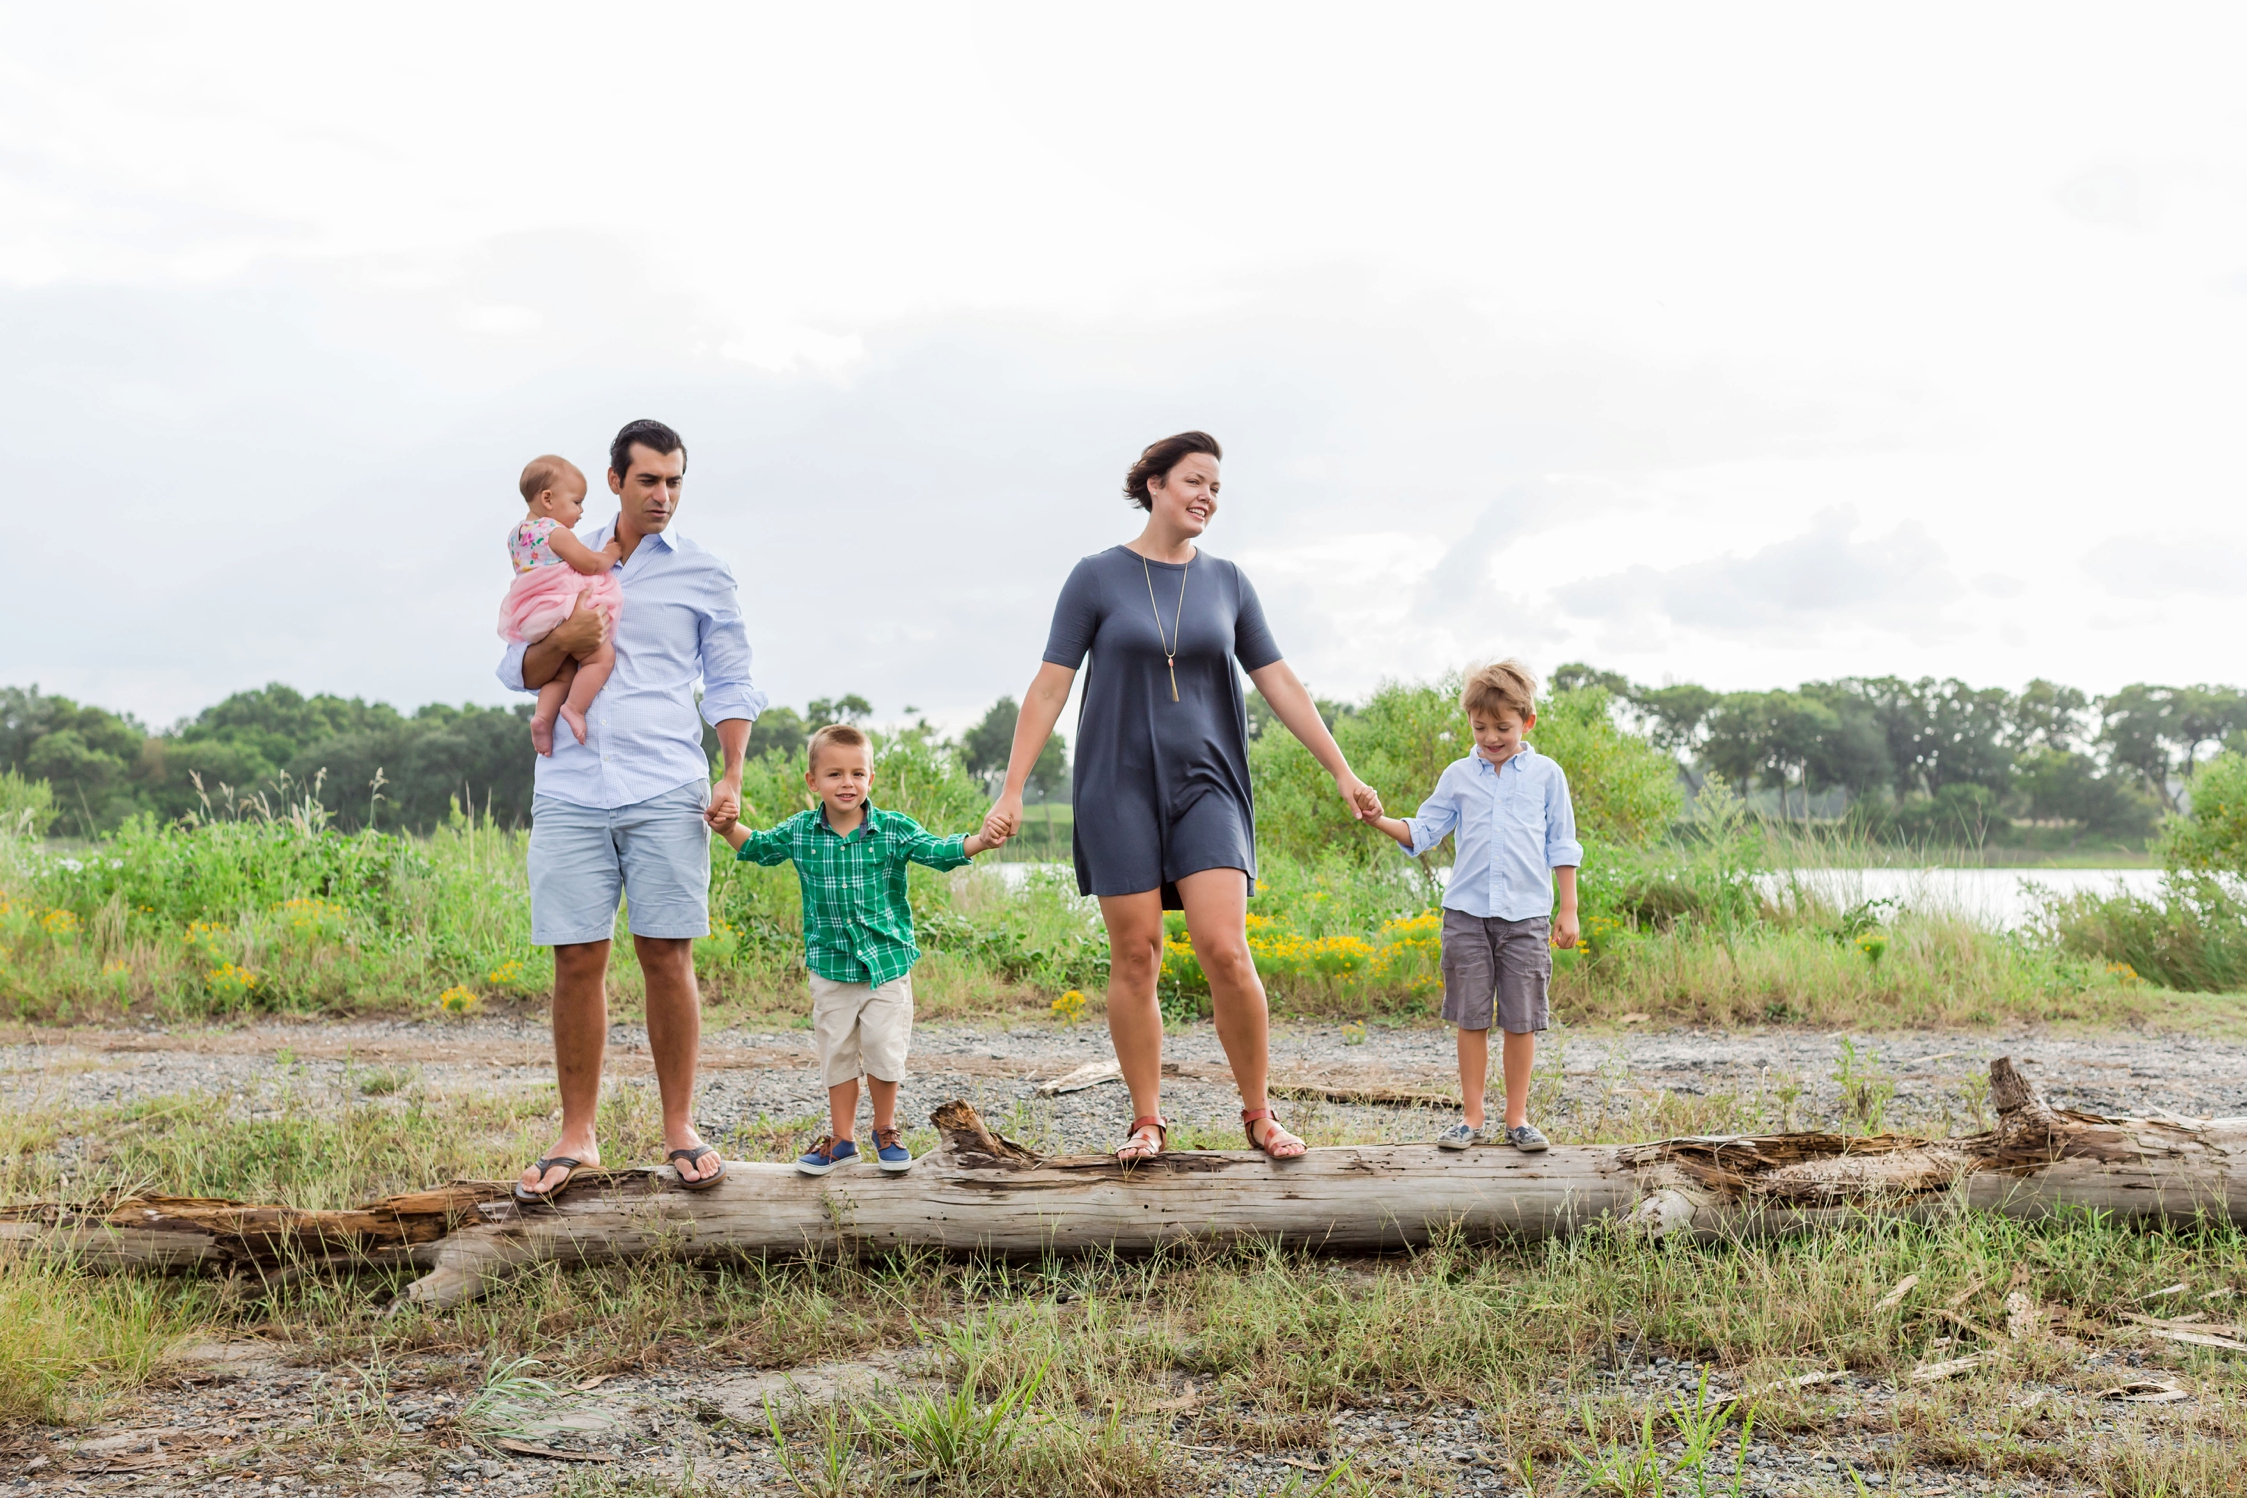 Beautiful Outdoor Family Lifestyle Photography Session | Brooke tucker photography